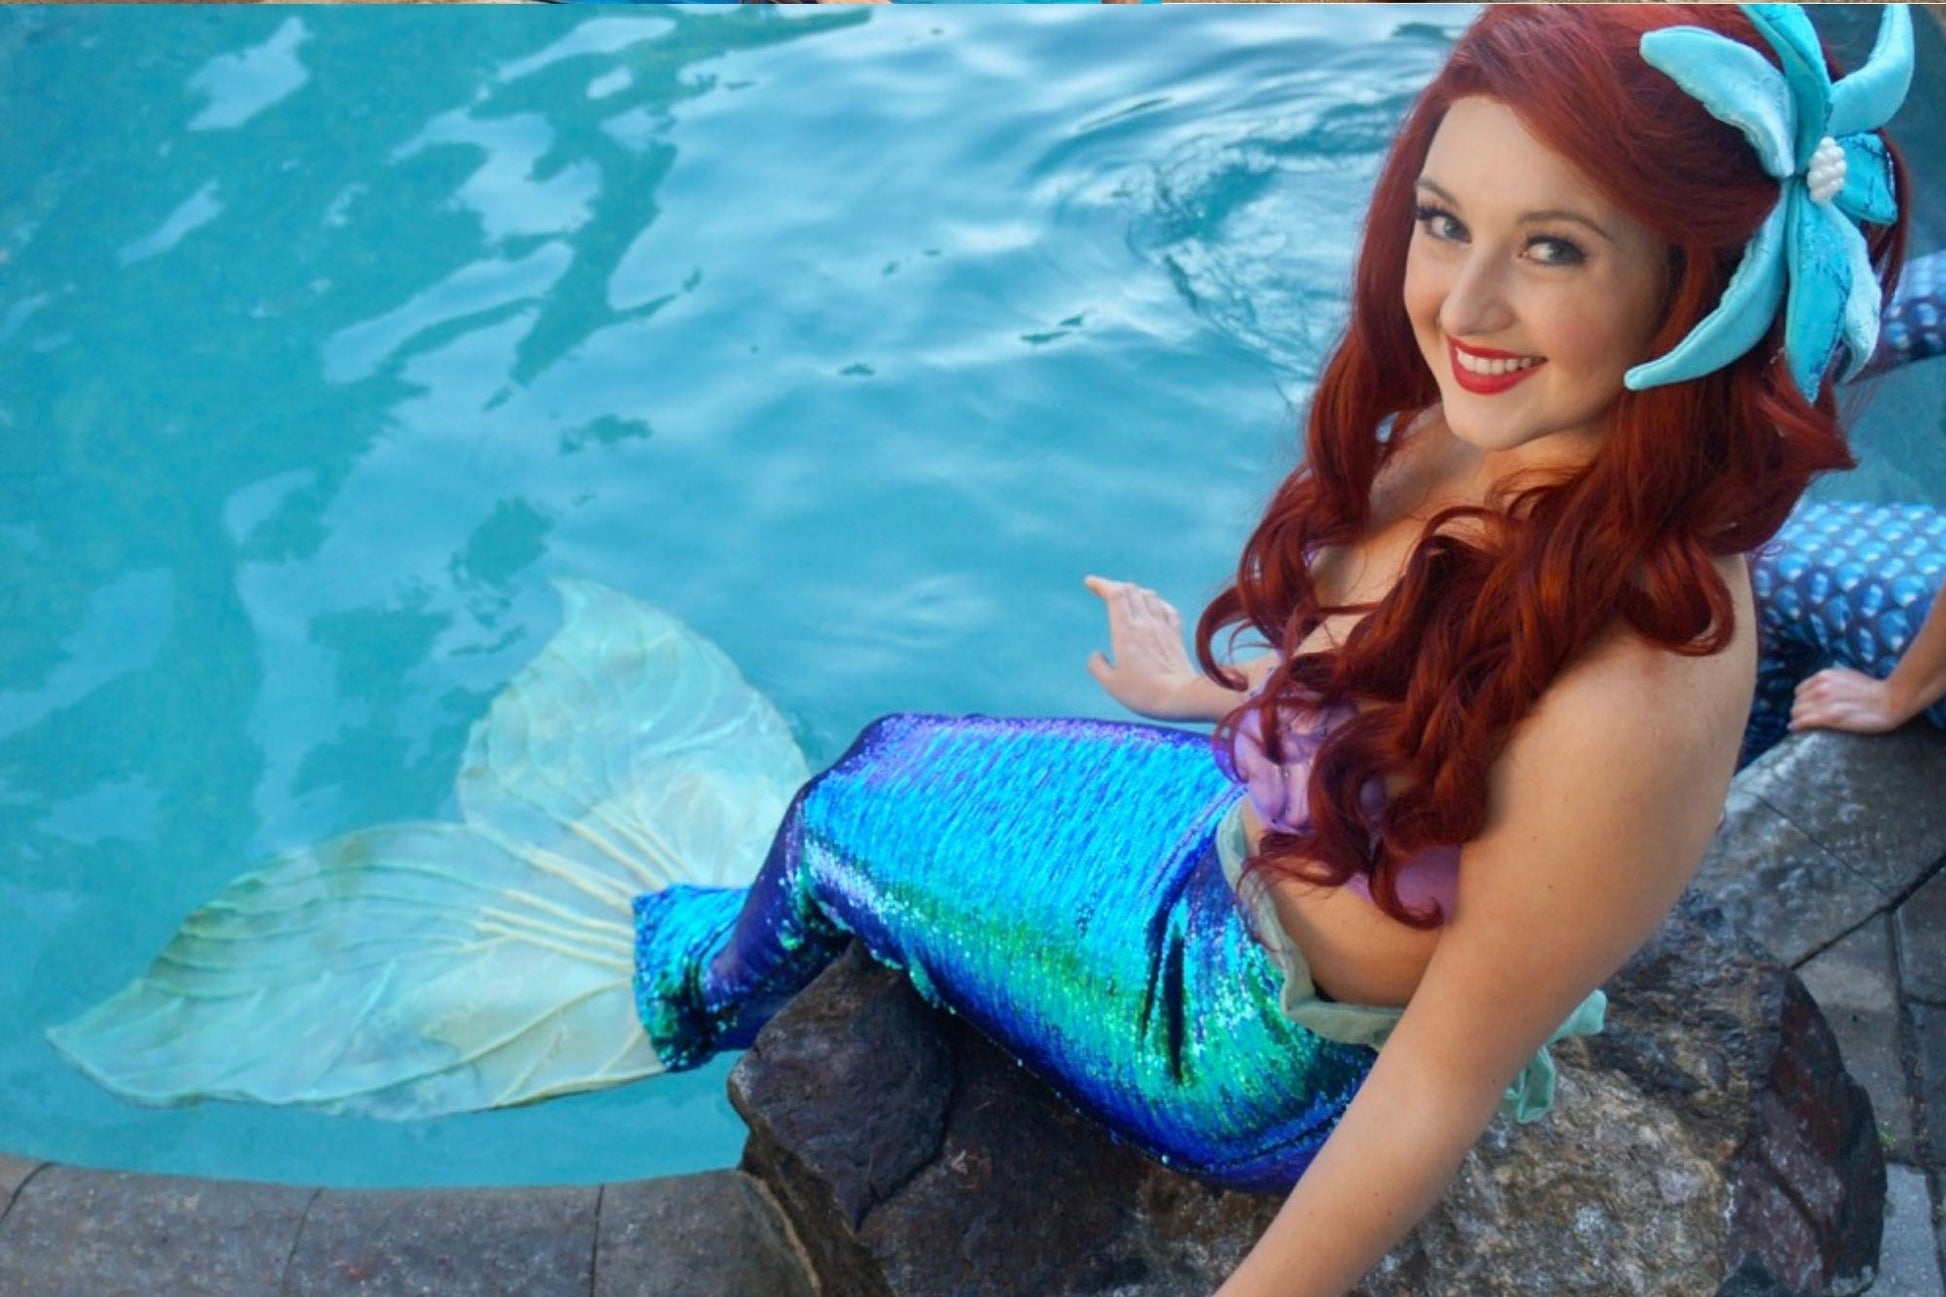 Little mermaid chicago party Ariel costume cosplay